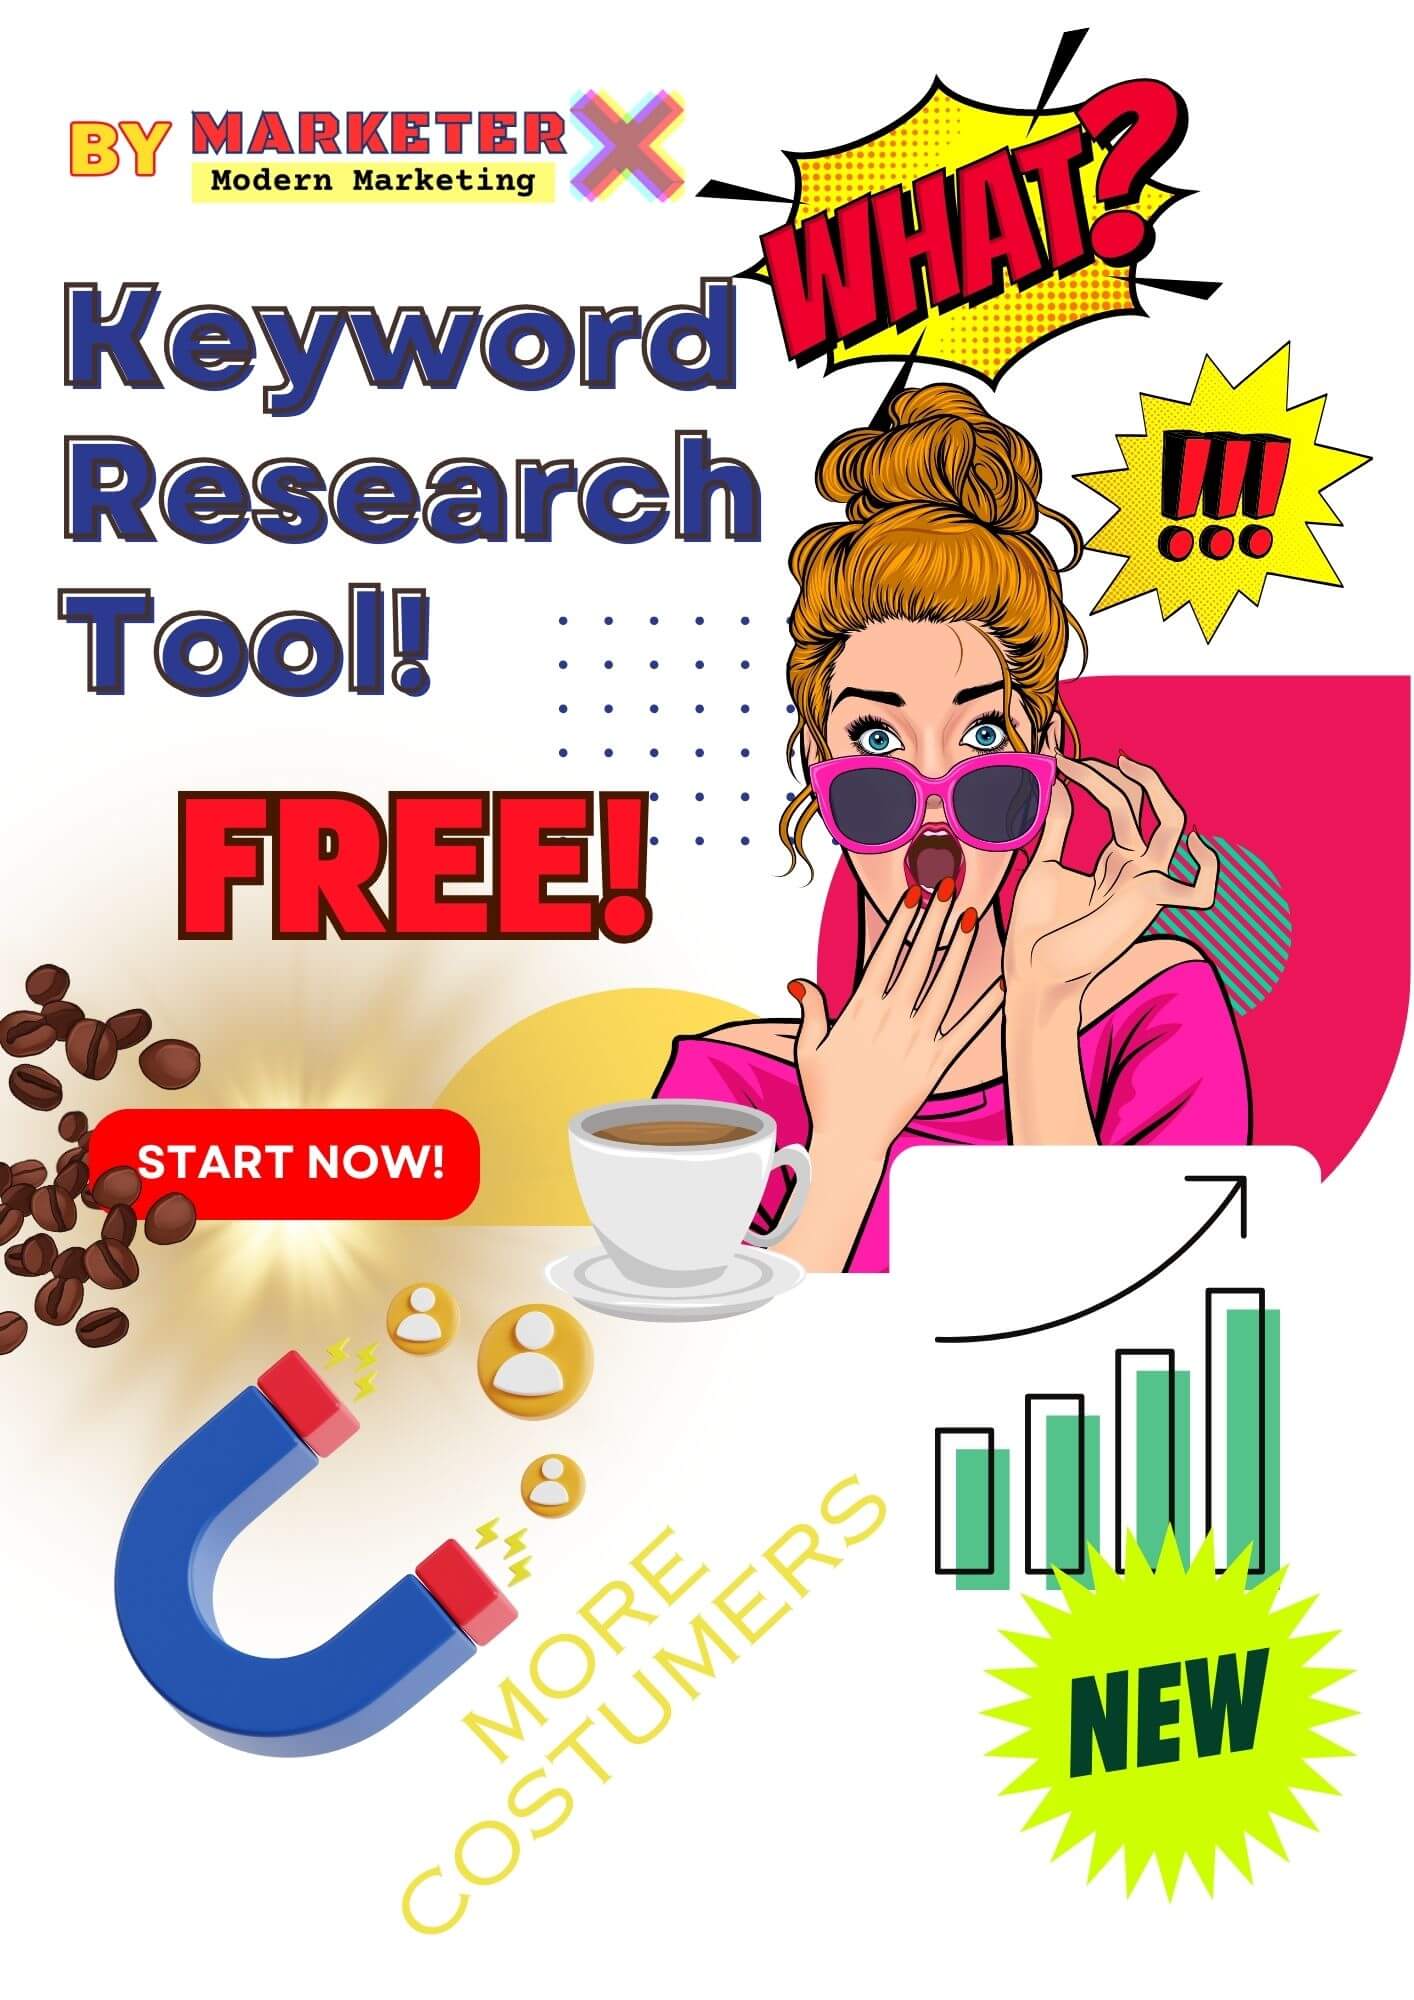 SIMPLE KEYWORD RESEARCH TOOL FROM MARKETER-X